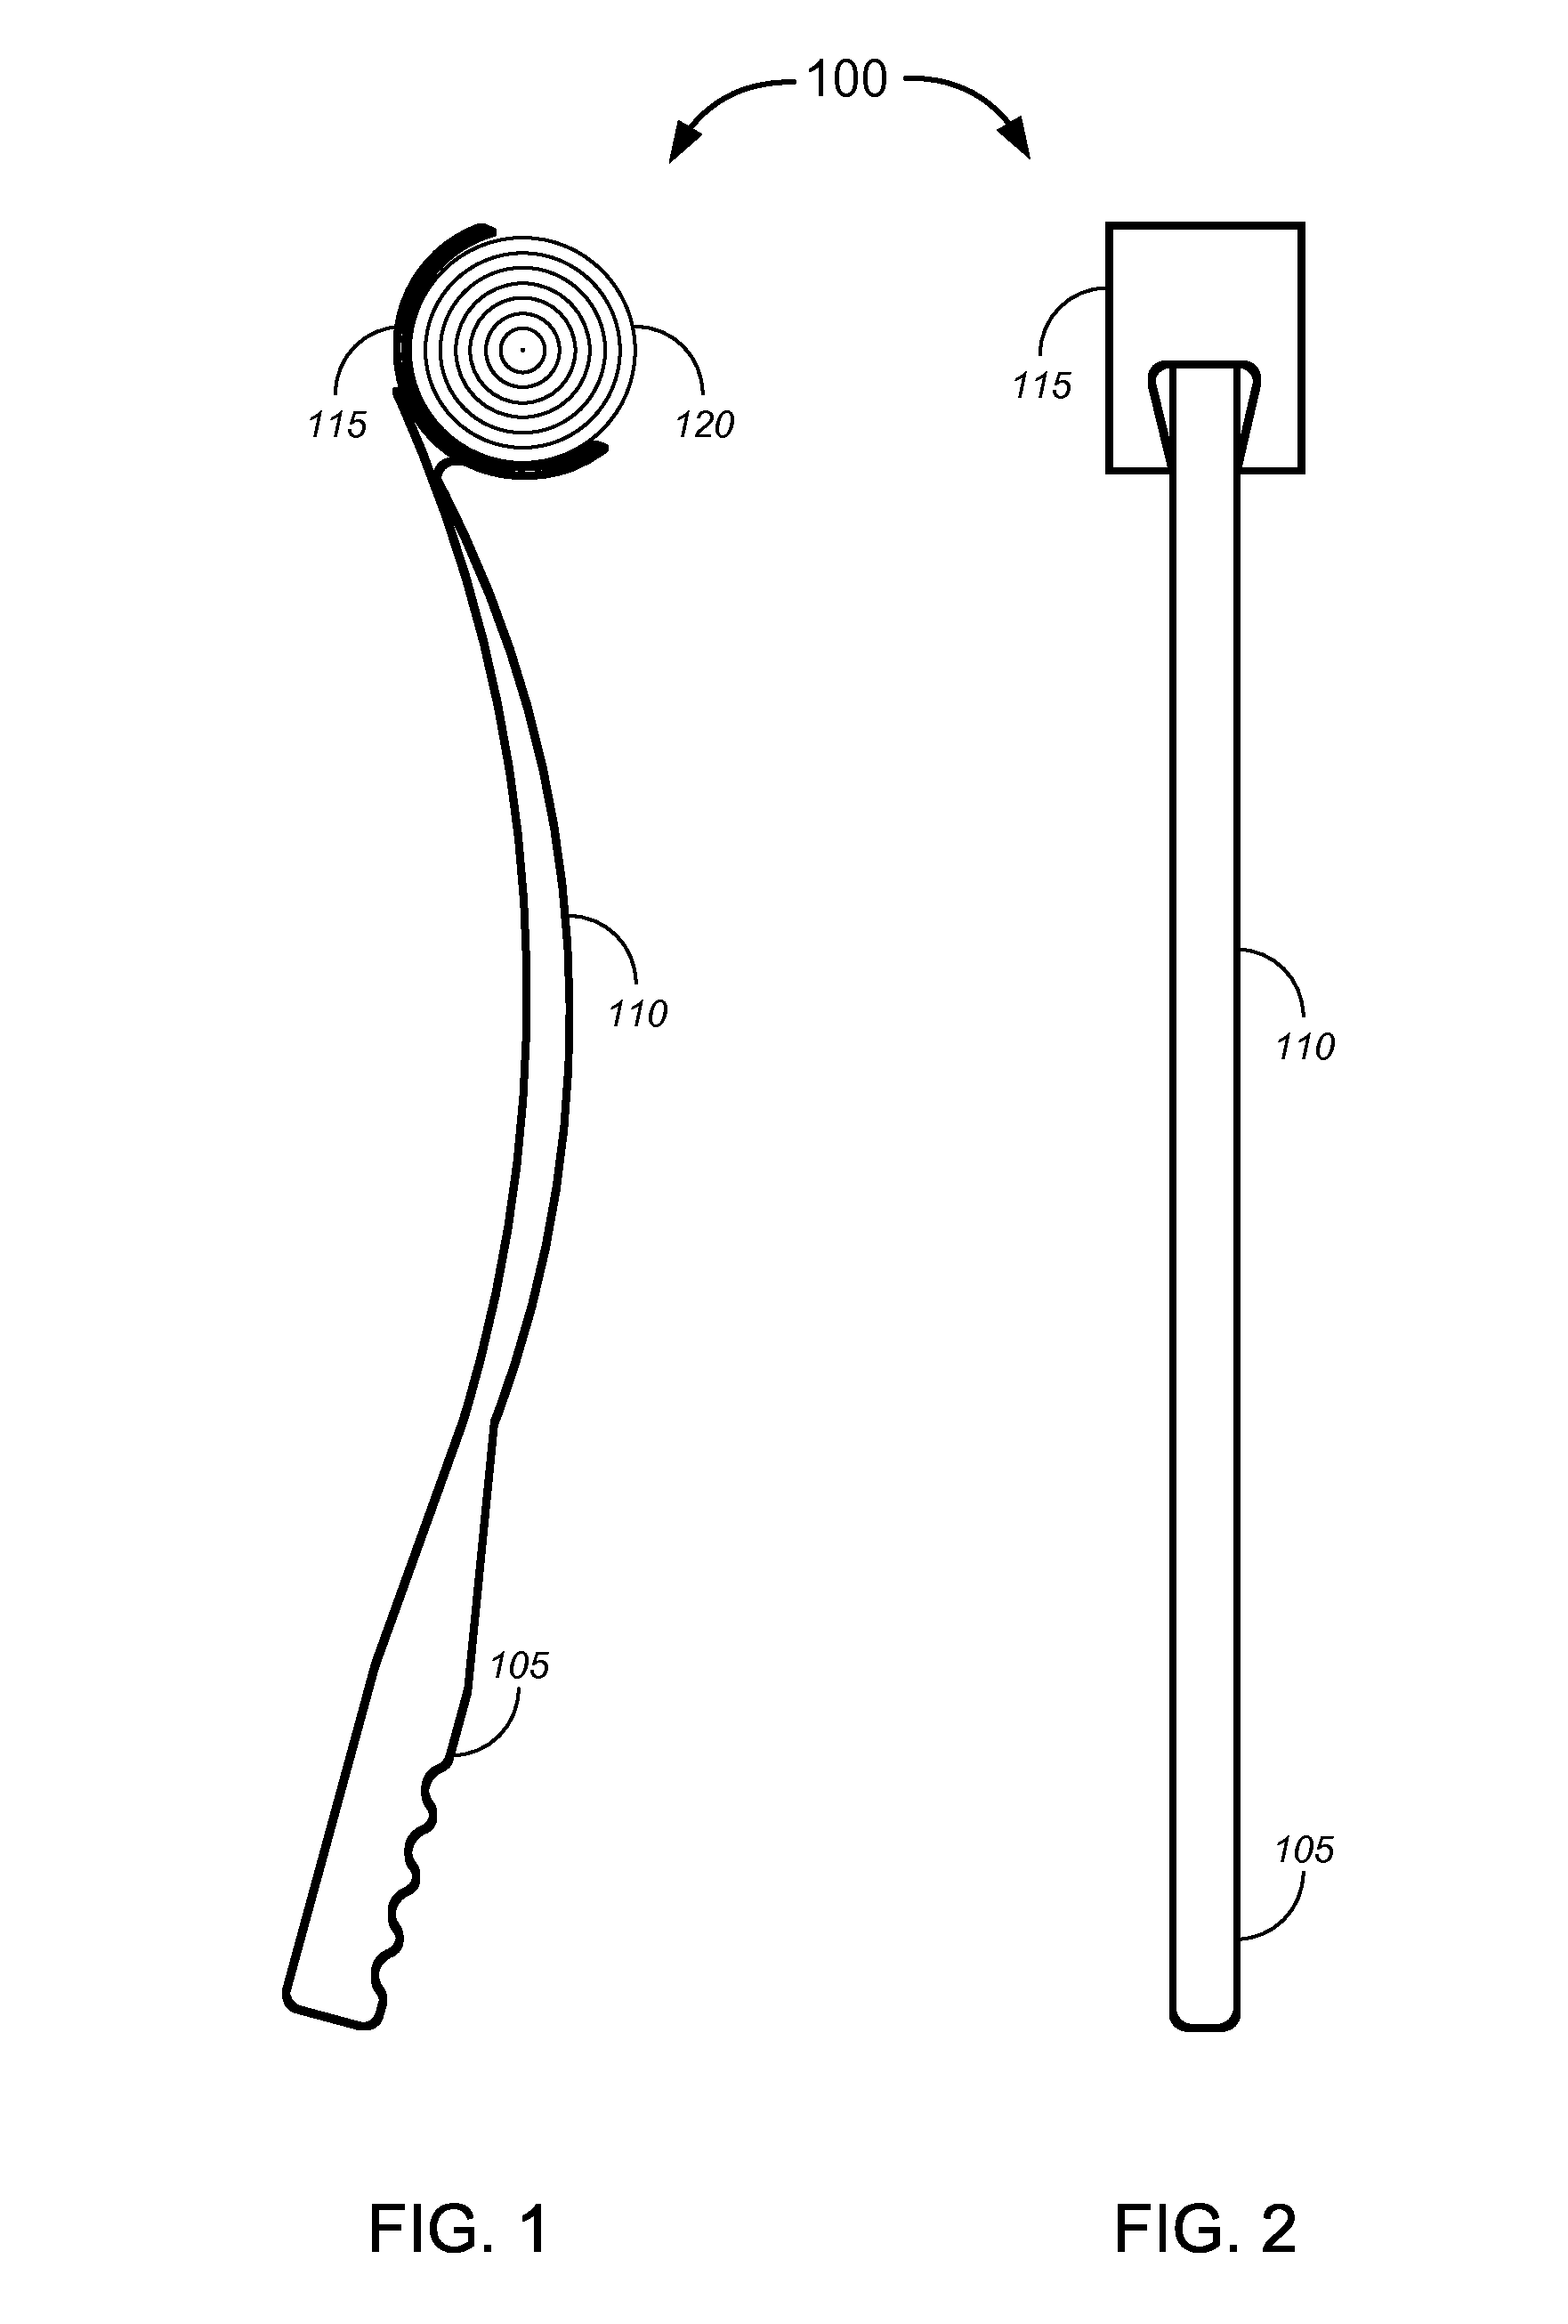 Paper launching apparatus and methods